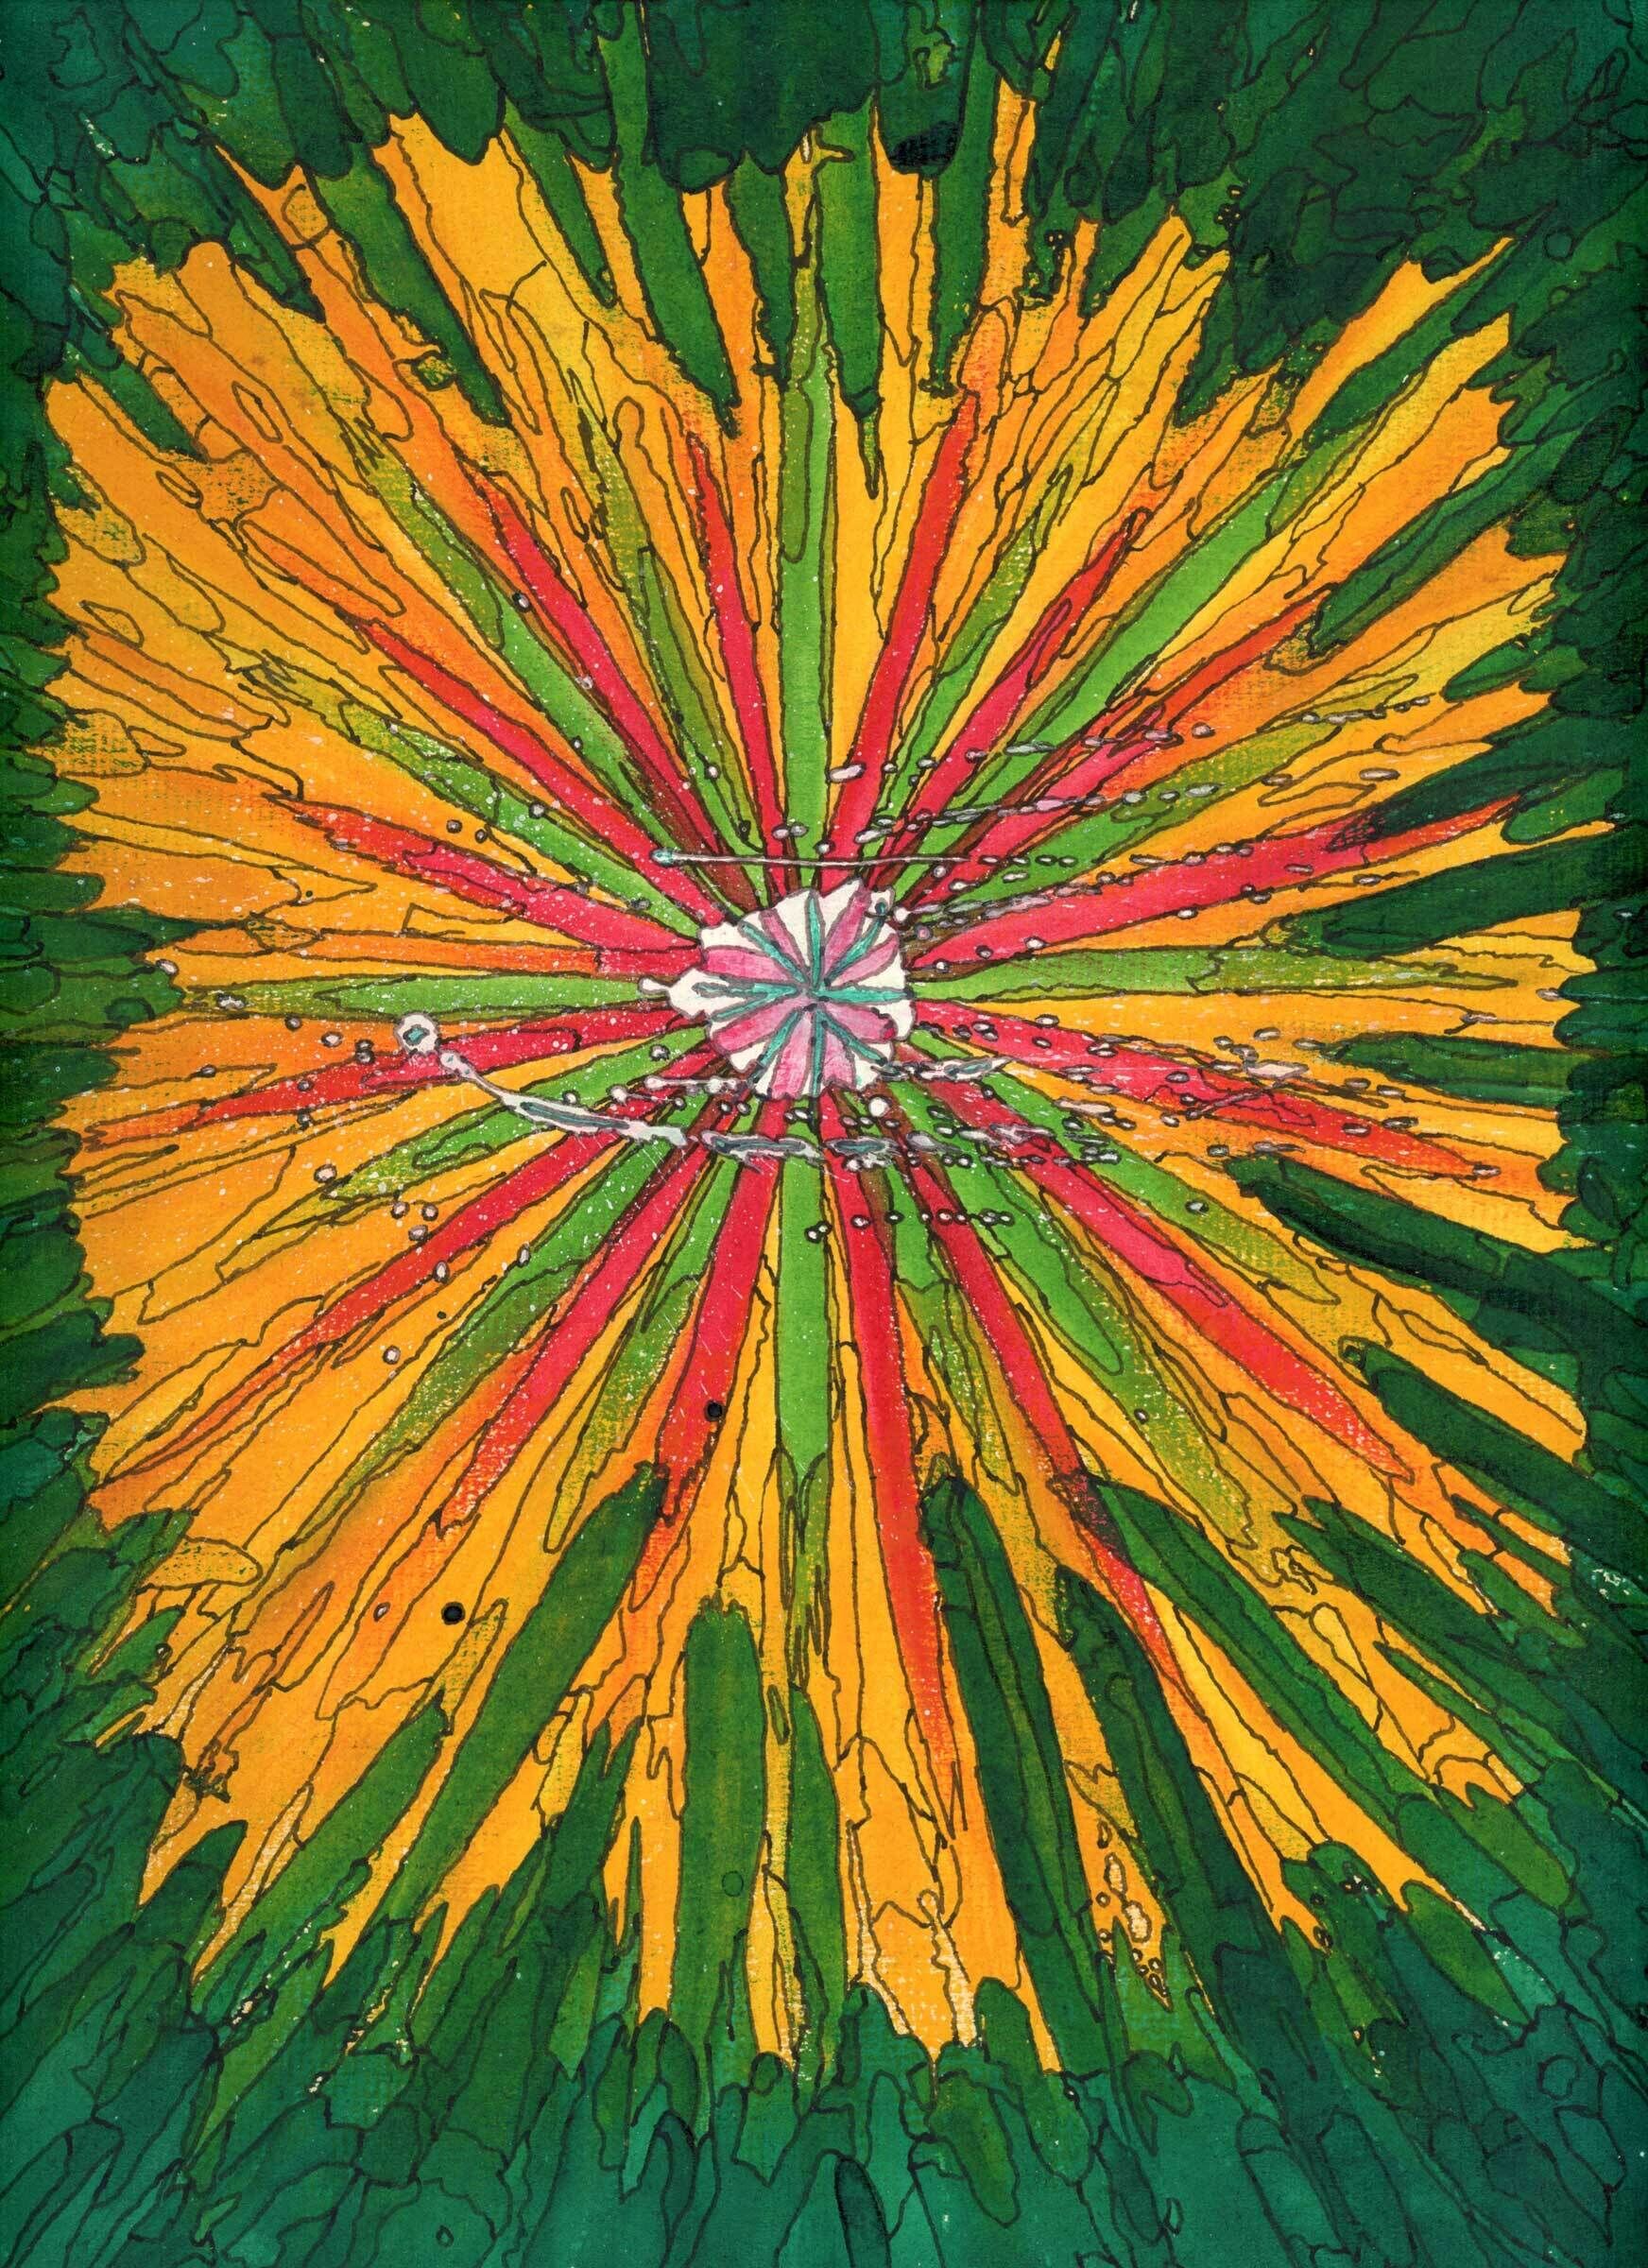 Yellow, red, and light green abstract oblong shapes shoot out from the center of the piece. Around the edges of the paper, the shapes all become a dark green color.